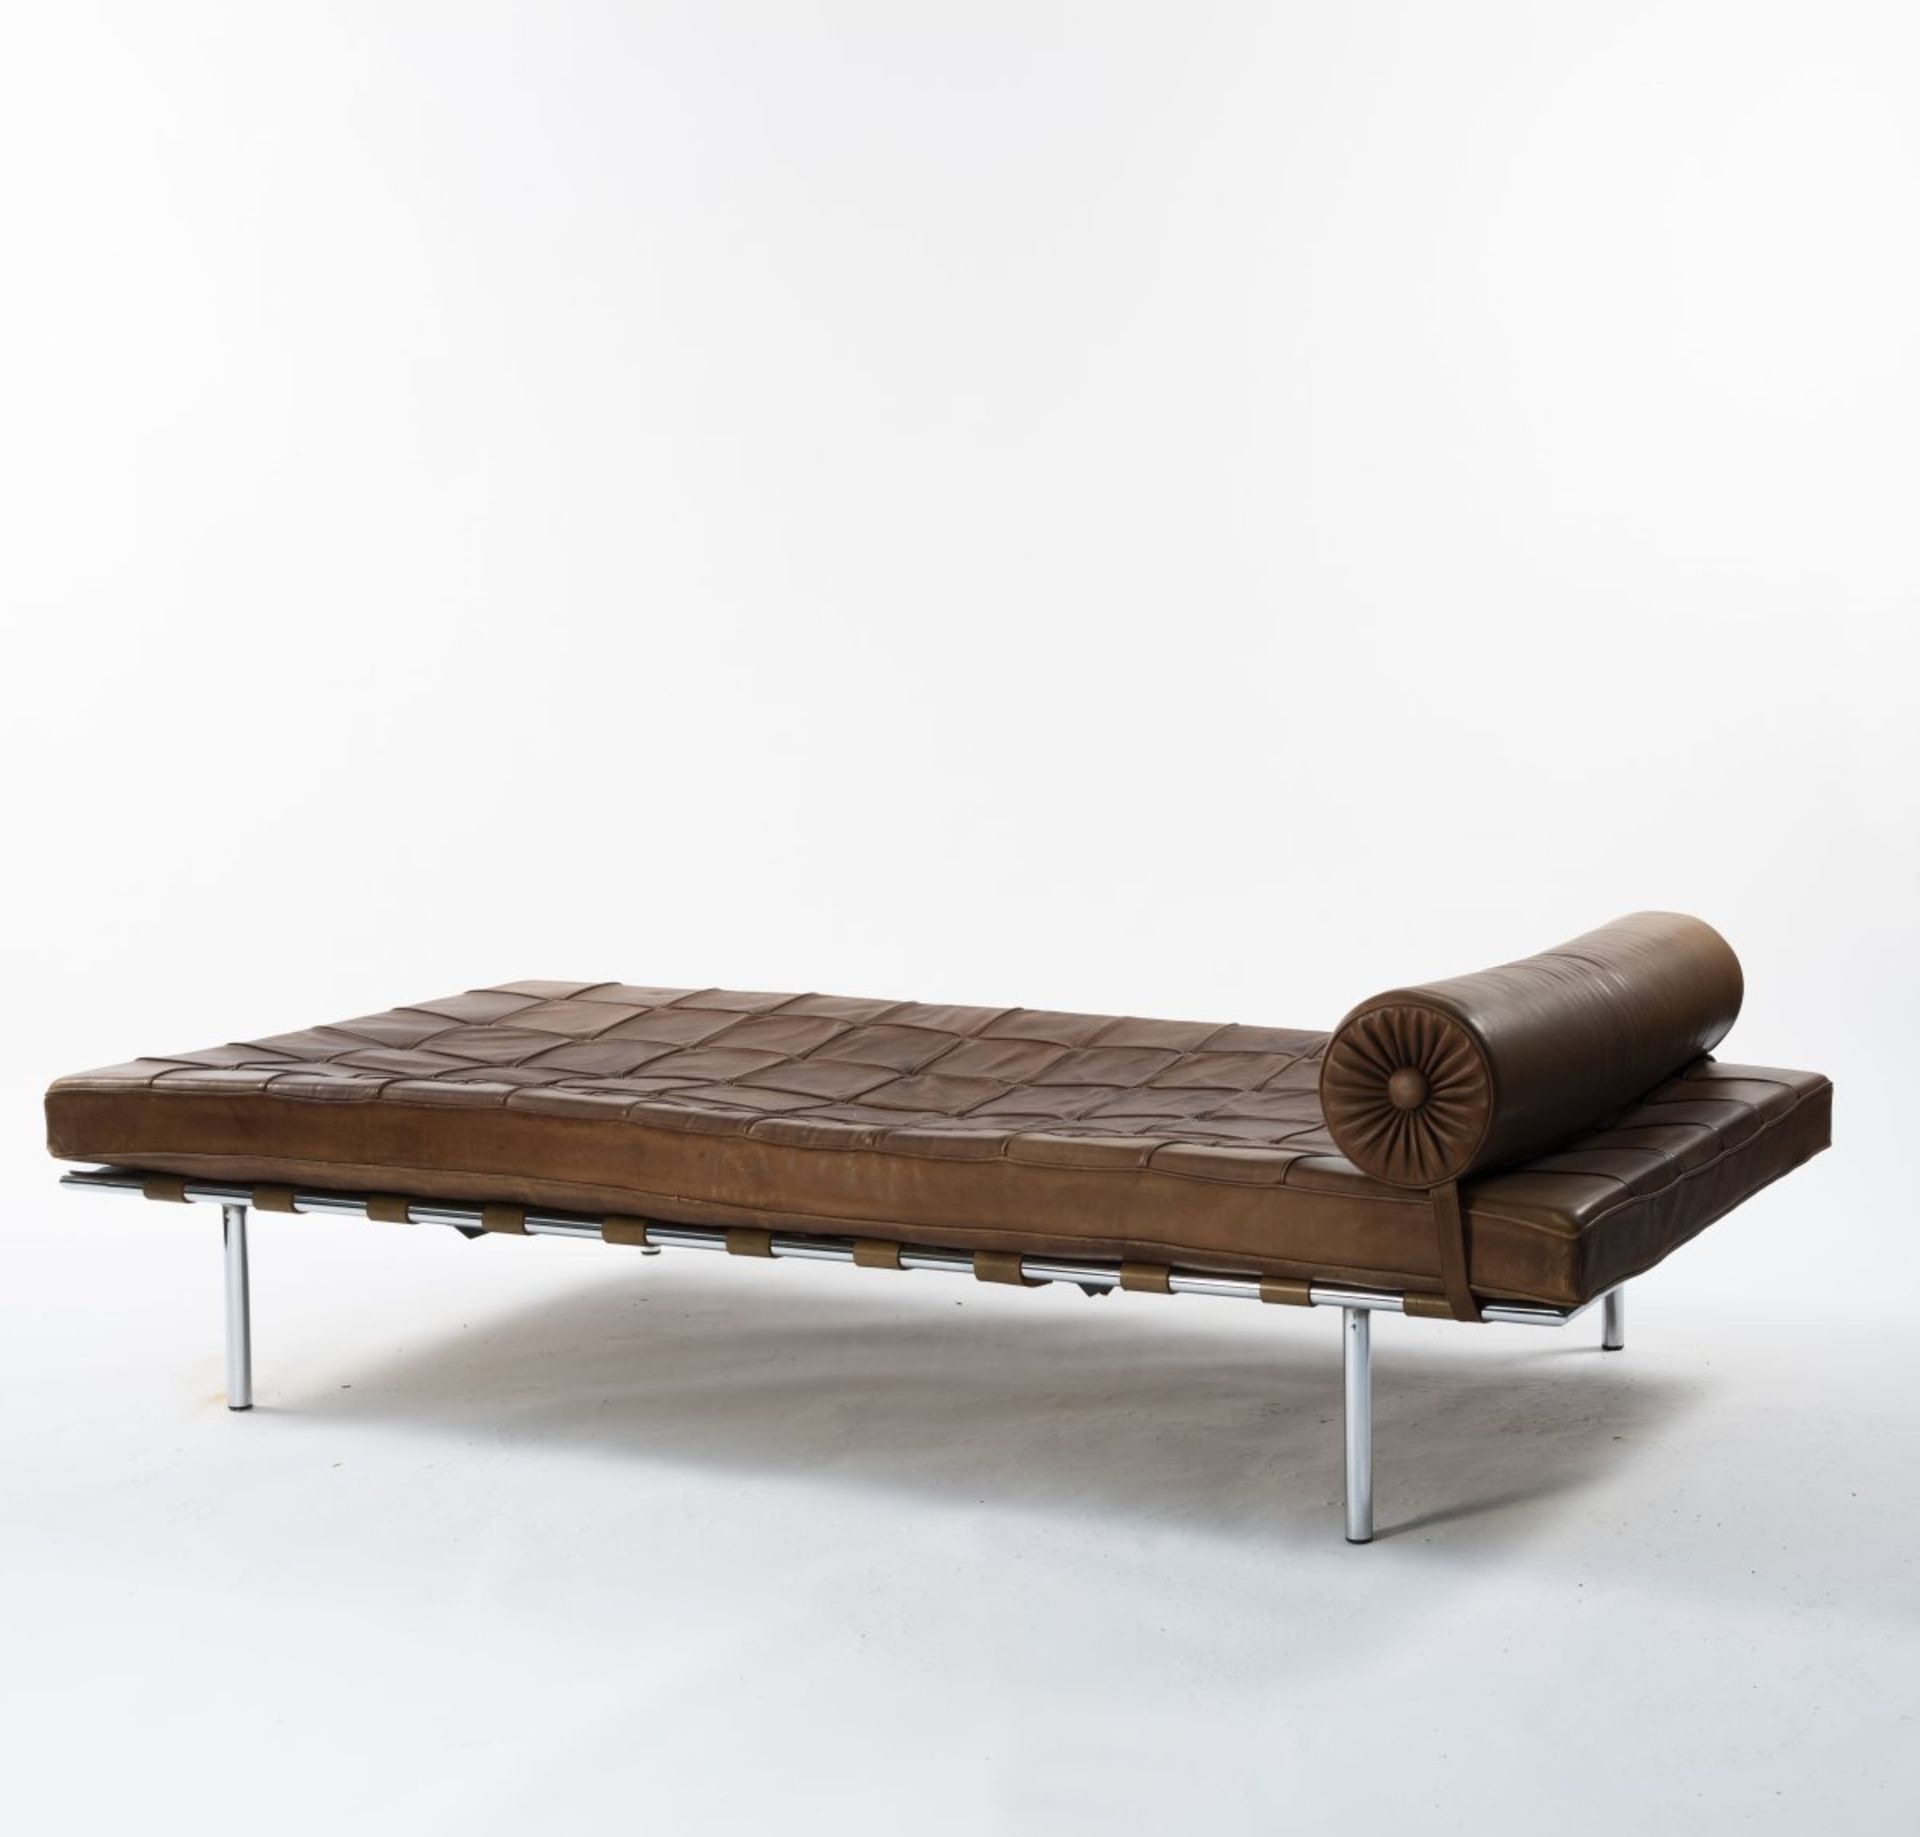 Ludwig Mies van der Rohe; Lilly Reich , 'Barcelona' daybed, 1930 - Image 2 of 6